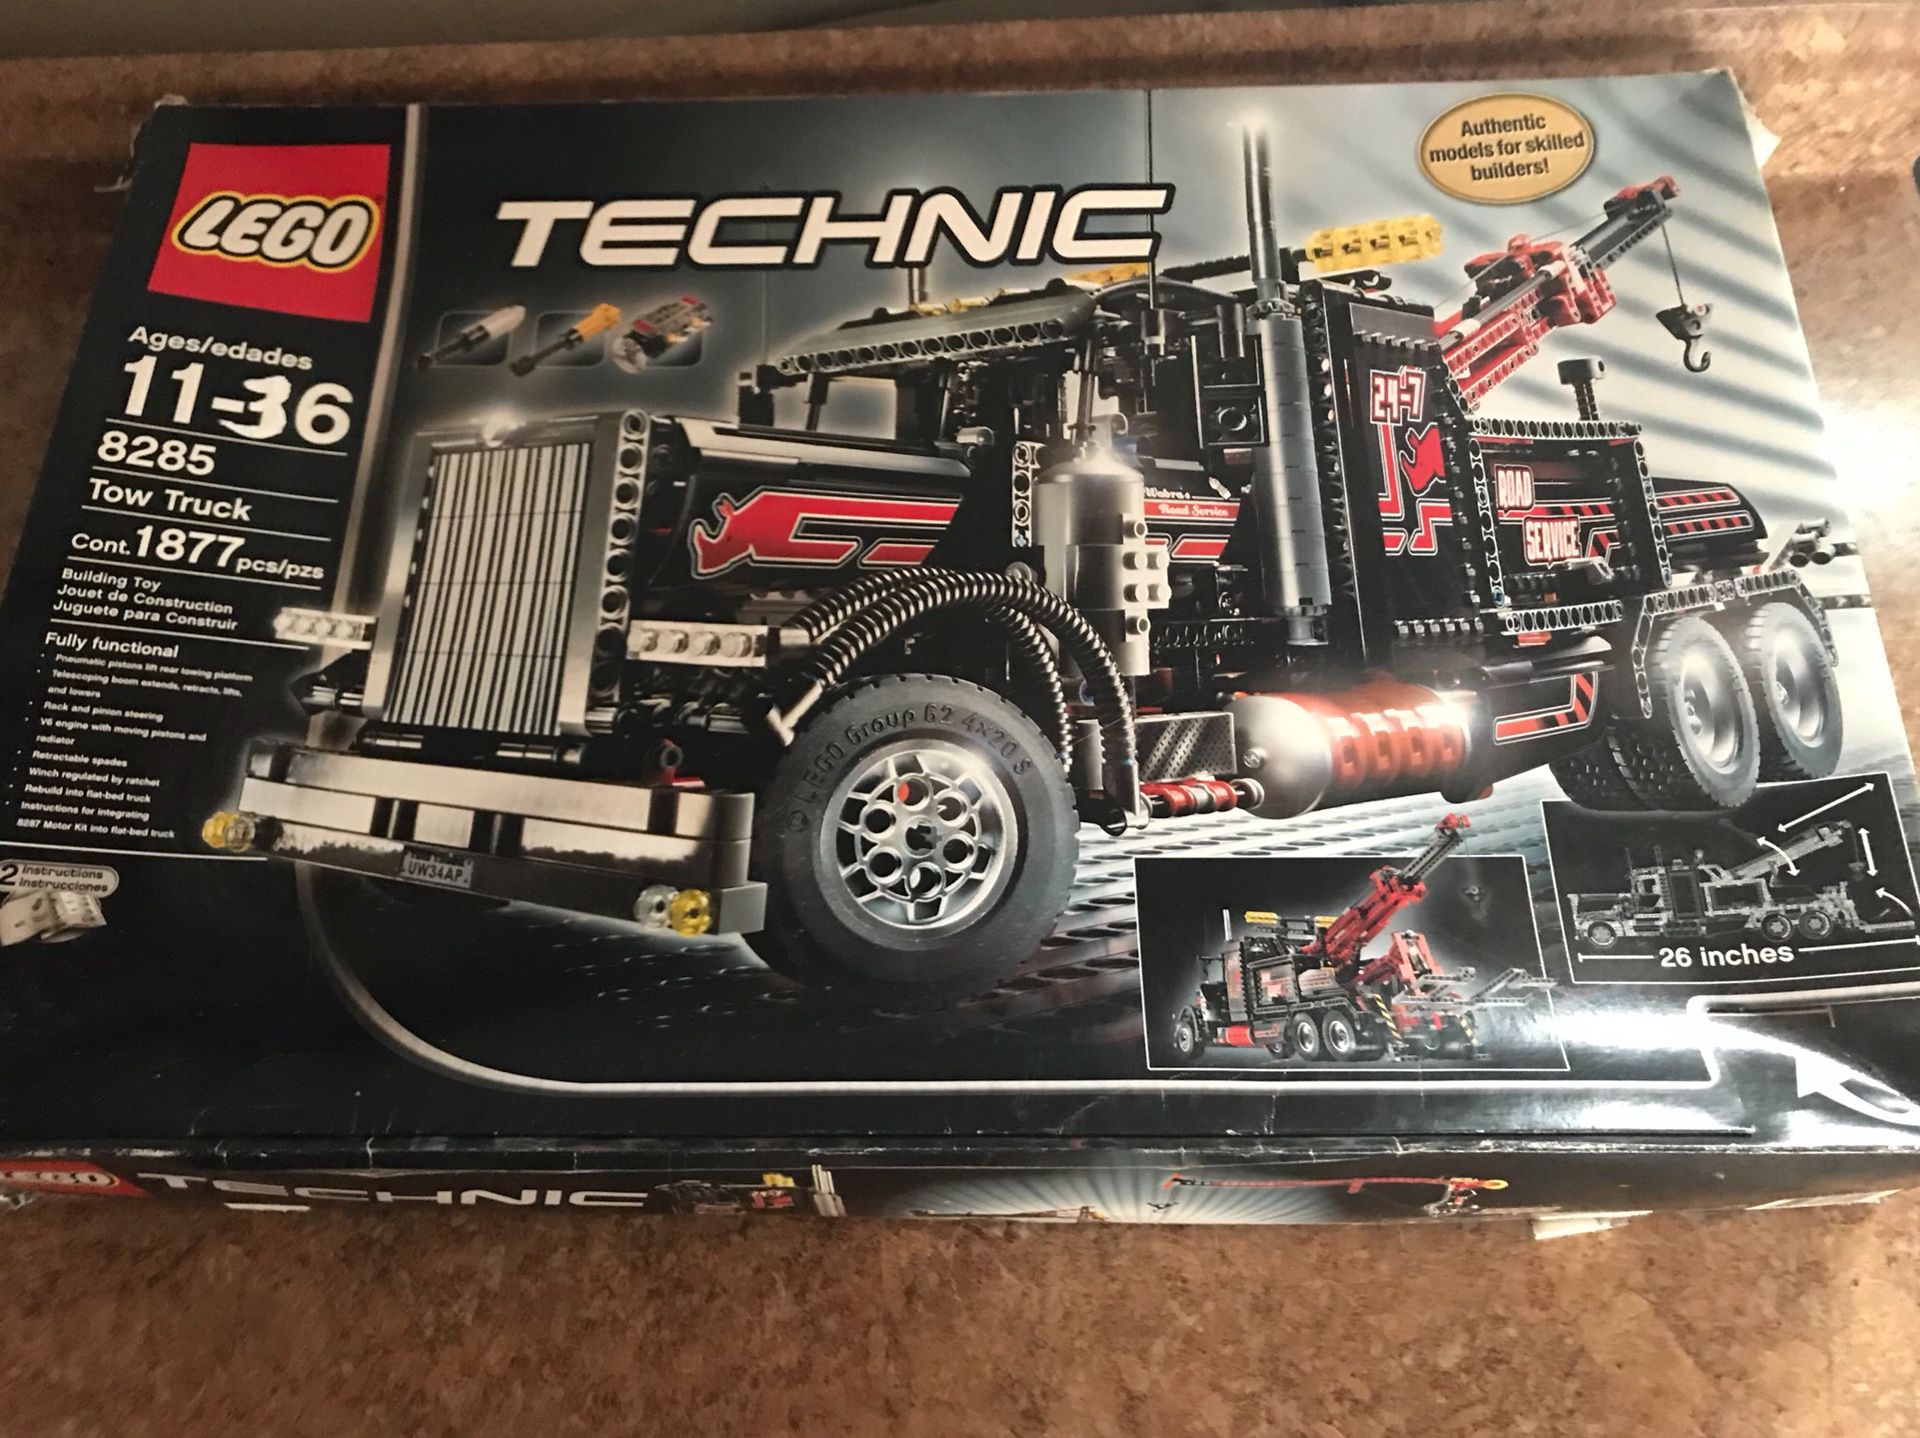 technic tow truck for Sale in Tyngsborough, MA - OfferUp